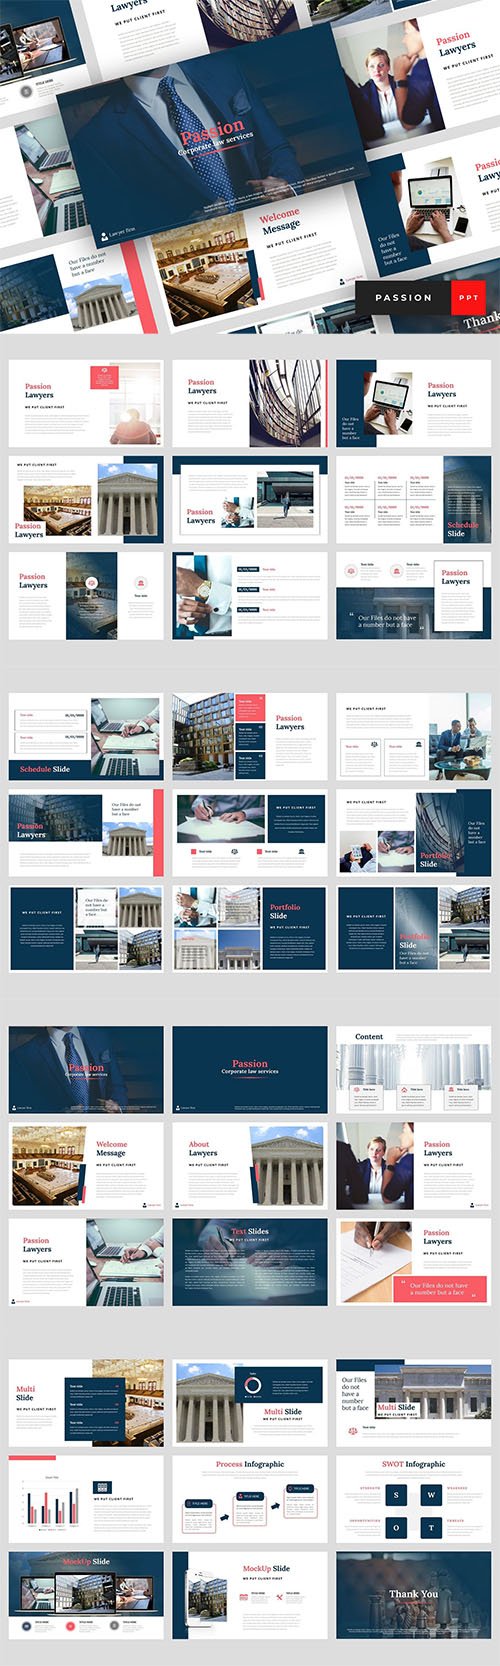 Passion - Lawyer PowerPoint Template